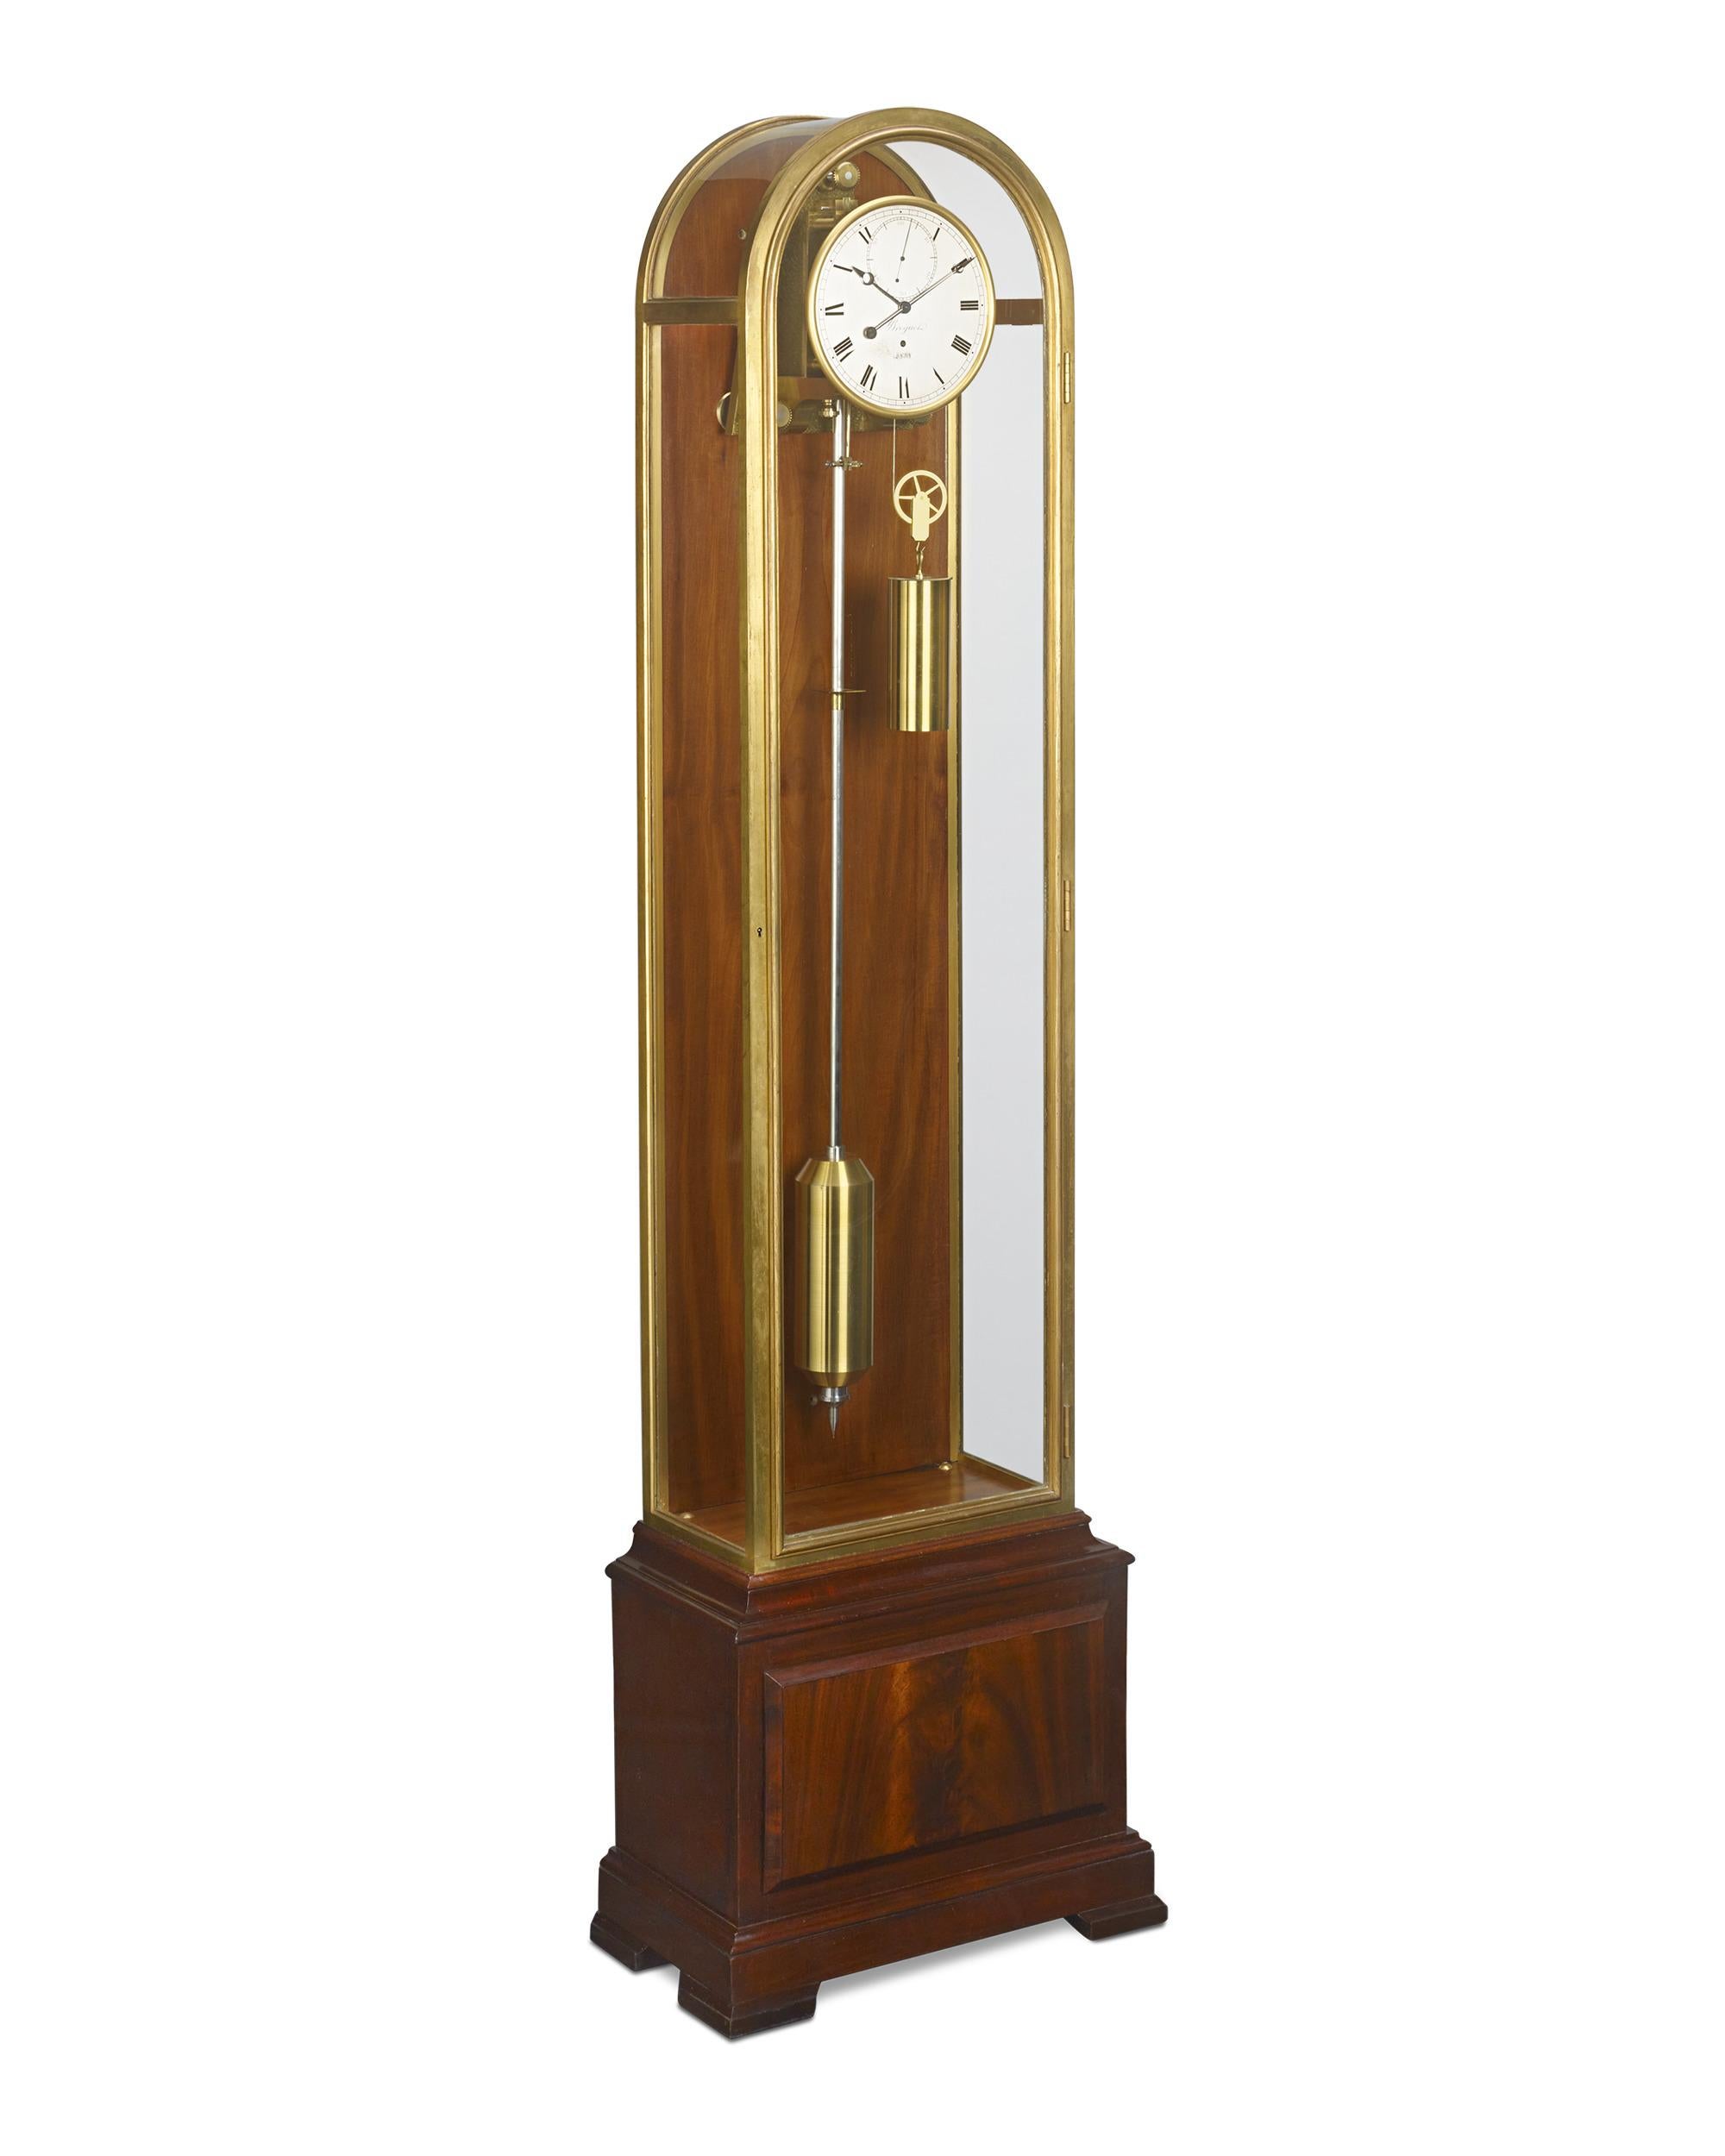 Completed on December 31st, 1931, this Breguet mahogany and brass floor month-going regulator clock is a perfect emblem of Breguet’s Art Deco and mechanical excellence during the important interwar period. Adorned with the hallmark Breguet features,